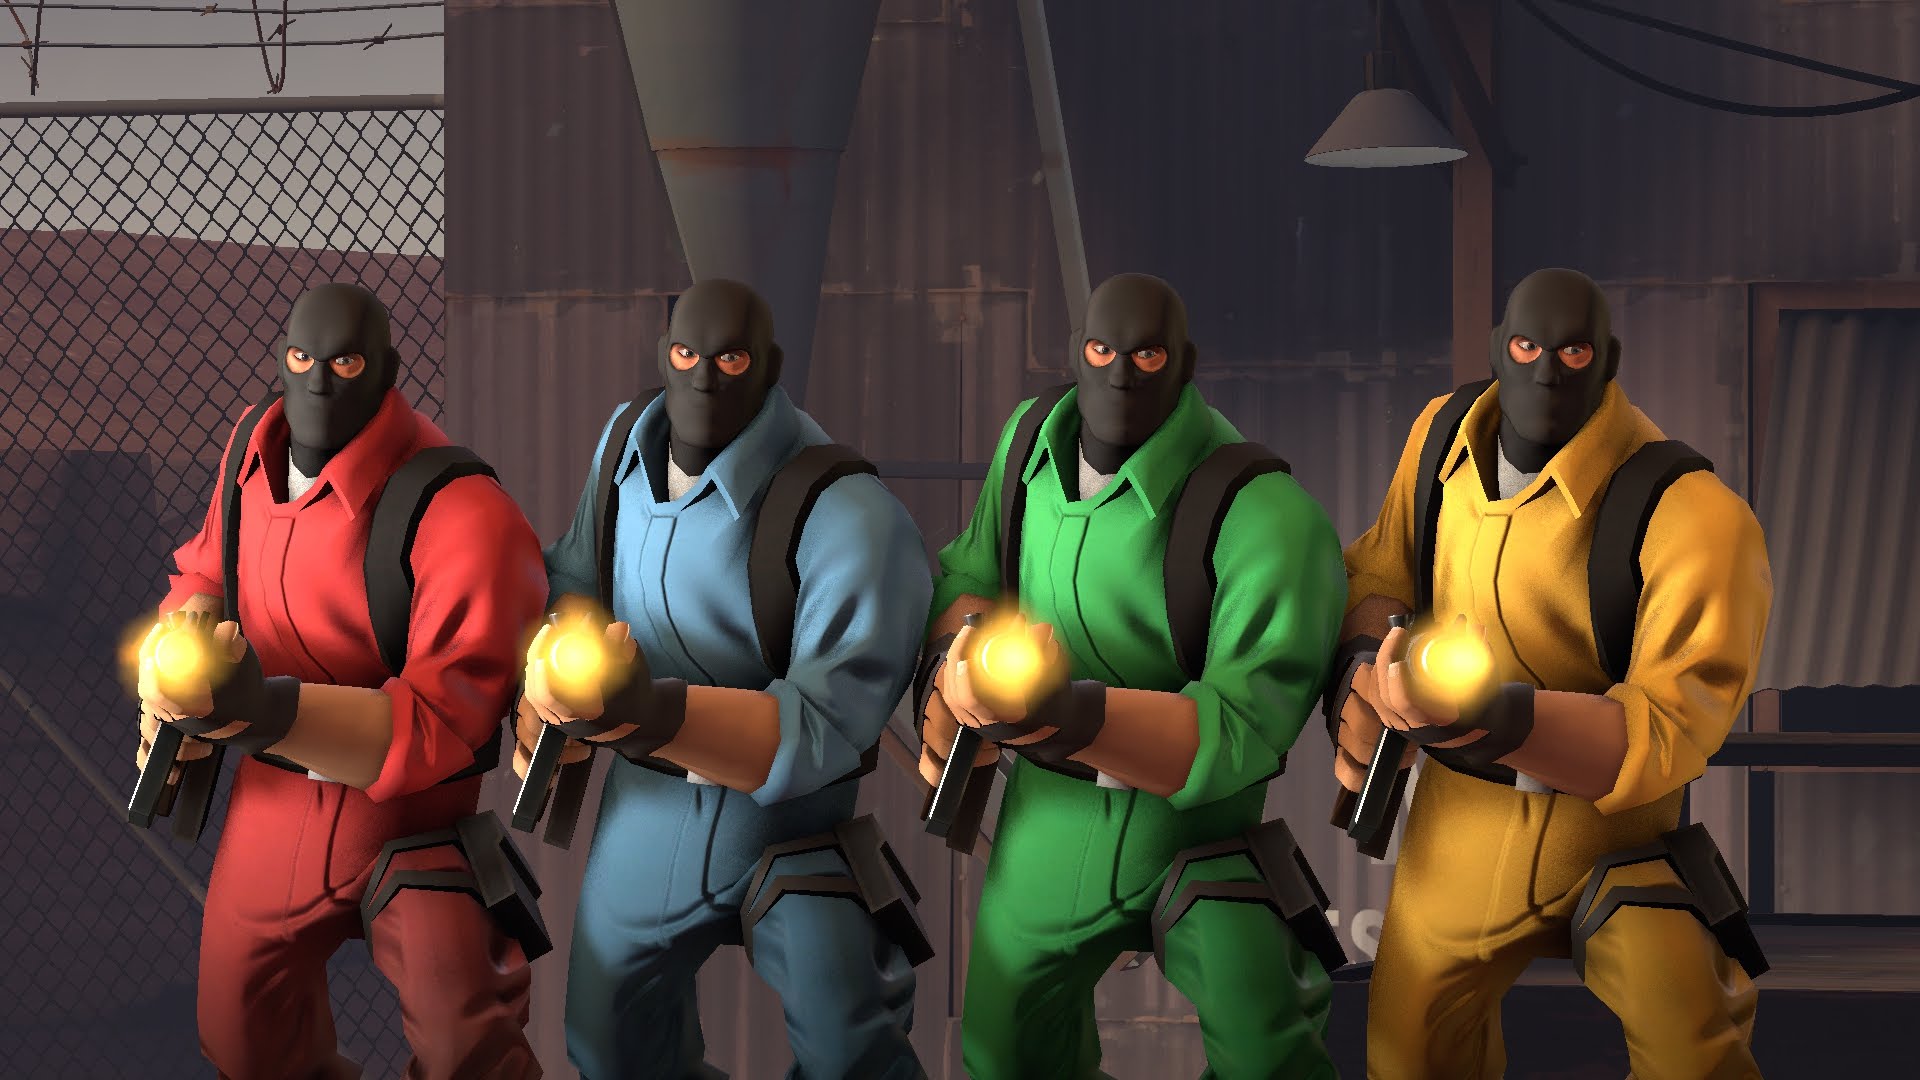 Nice Wallpapers Team Fortress 2 1920x1080px - Team Fortress 2 Classic Team - HD Wallpaper 